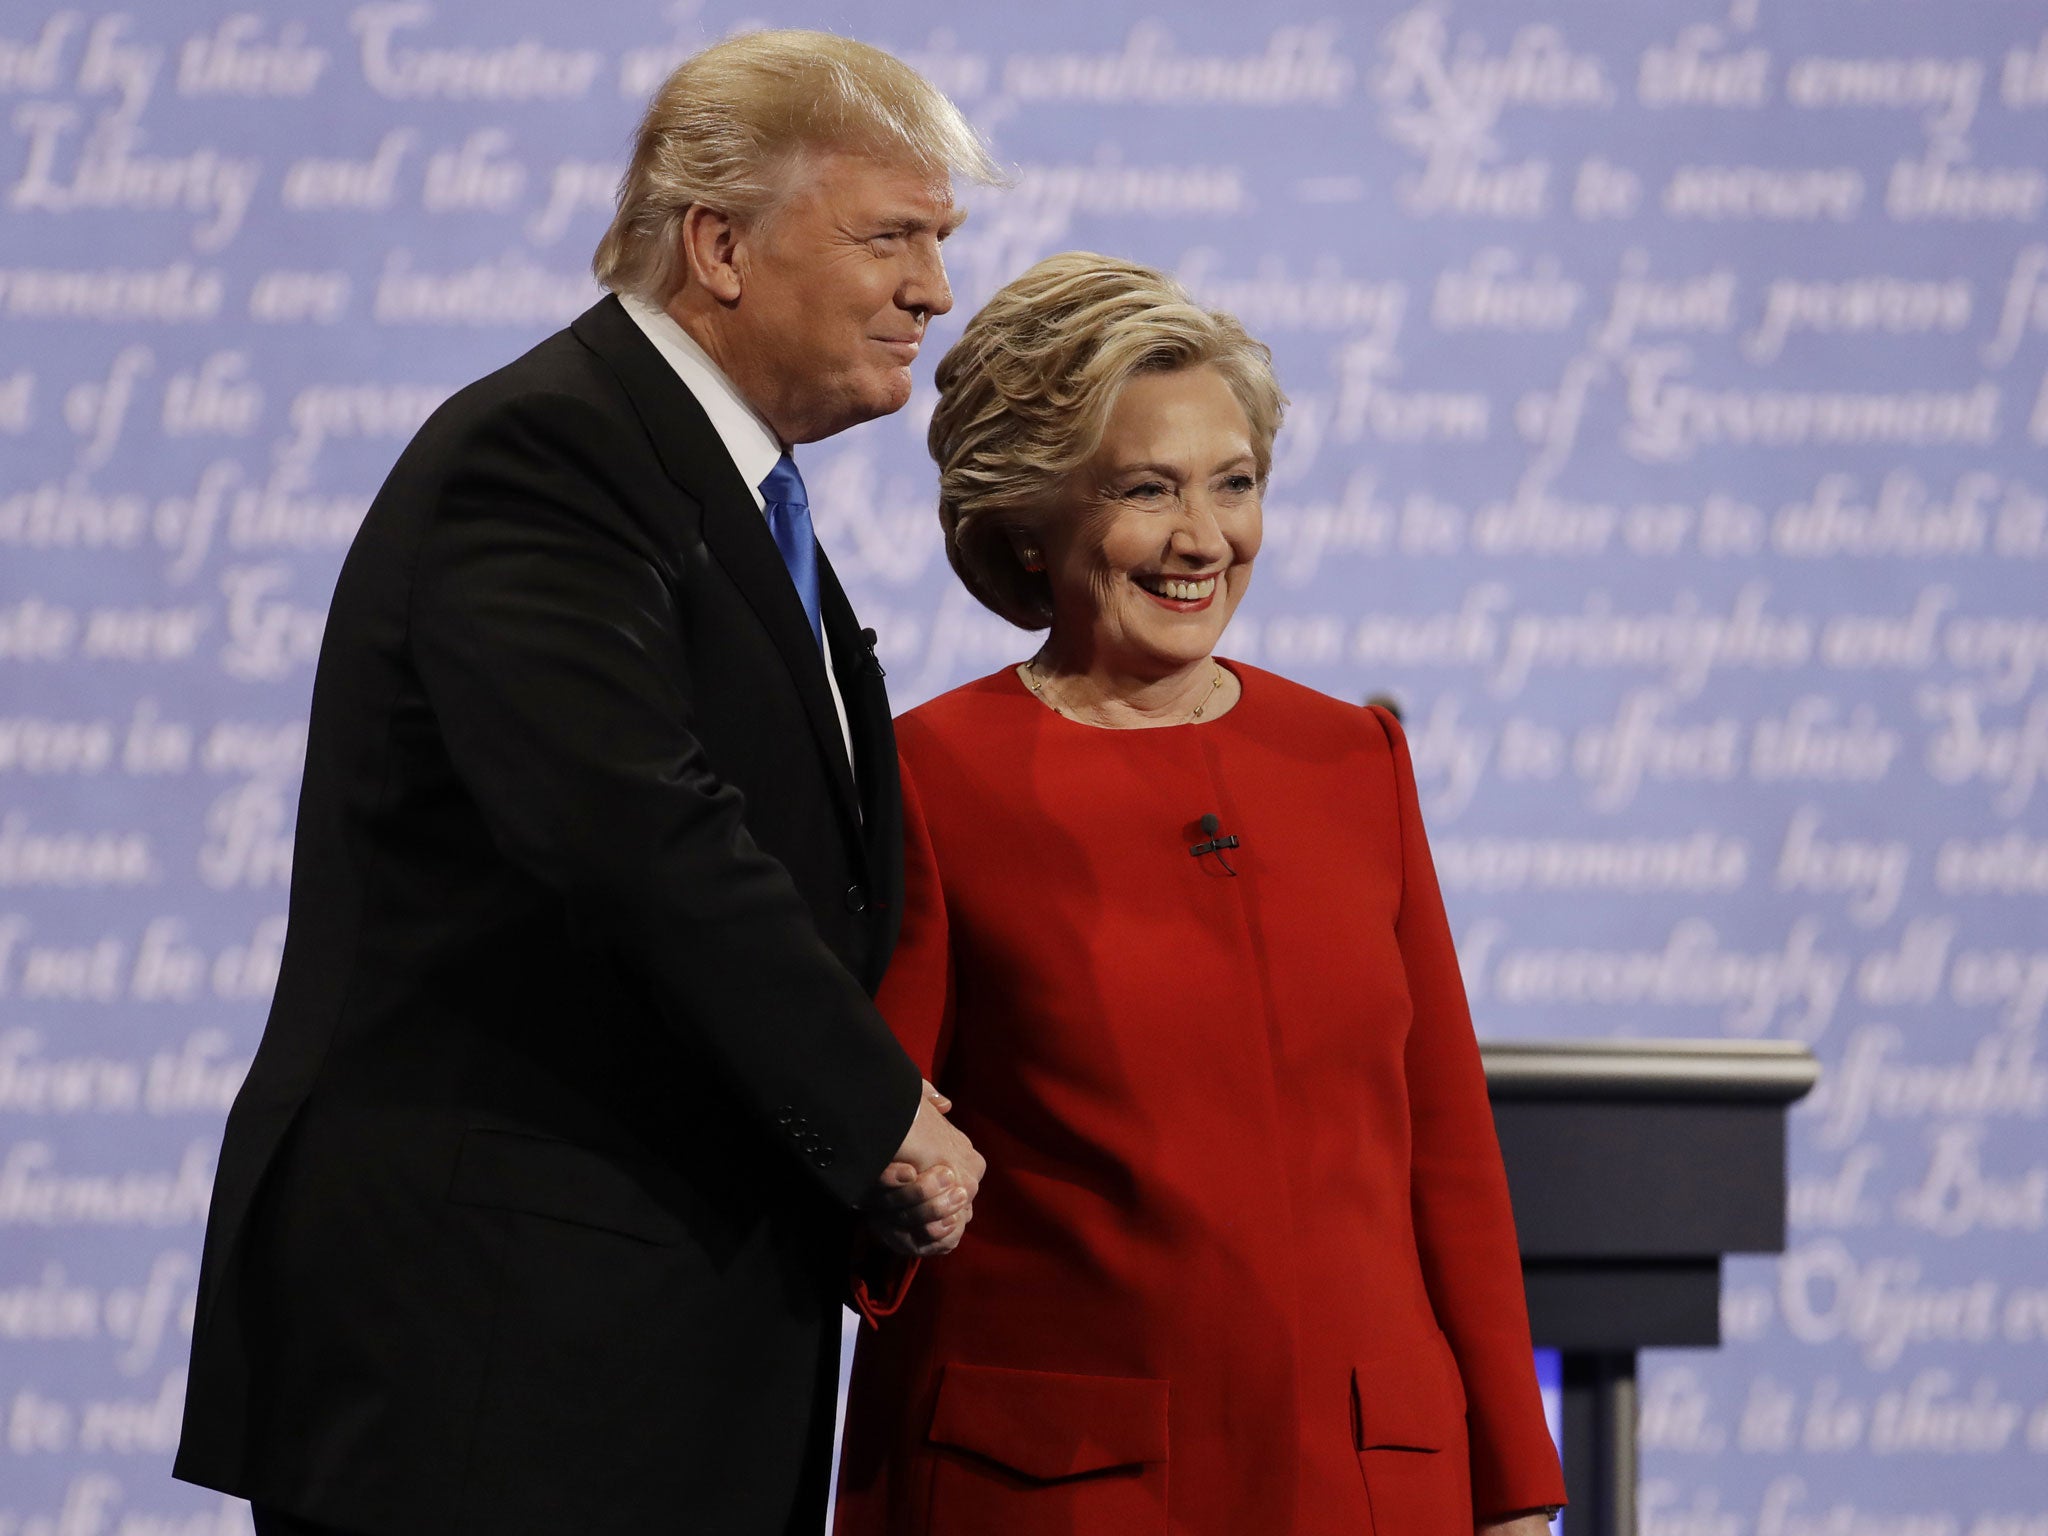 Democratic presidential nominee Hillary Clinton shakes hands with Republican presidential nominee Donald Trump during the presidential debate at Hofstra University in Hempstead, N.Y., Monday, Sept. 26, 2016.